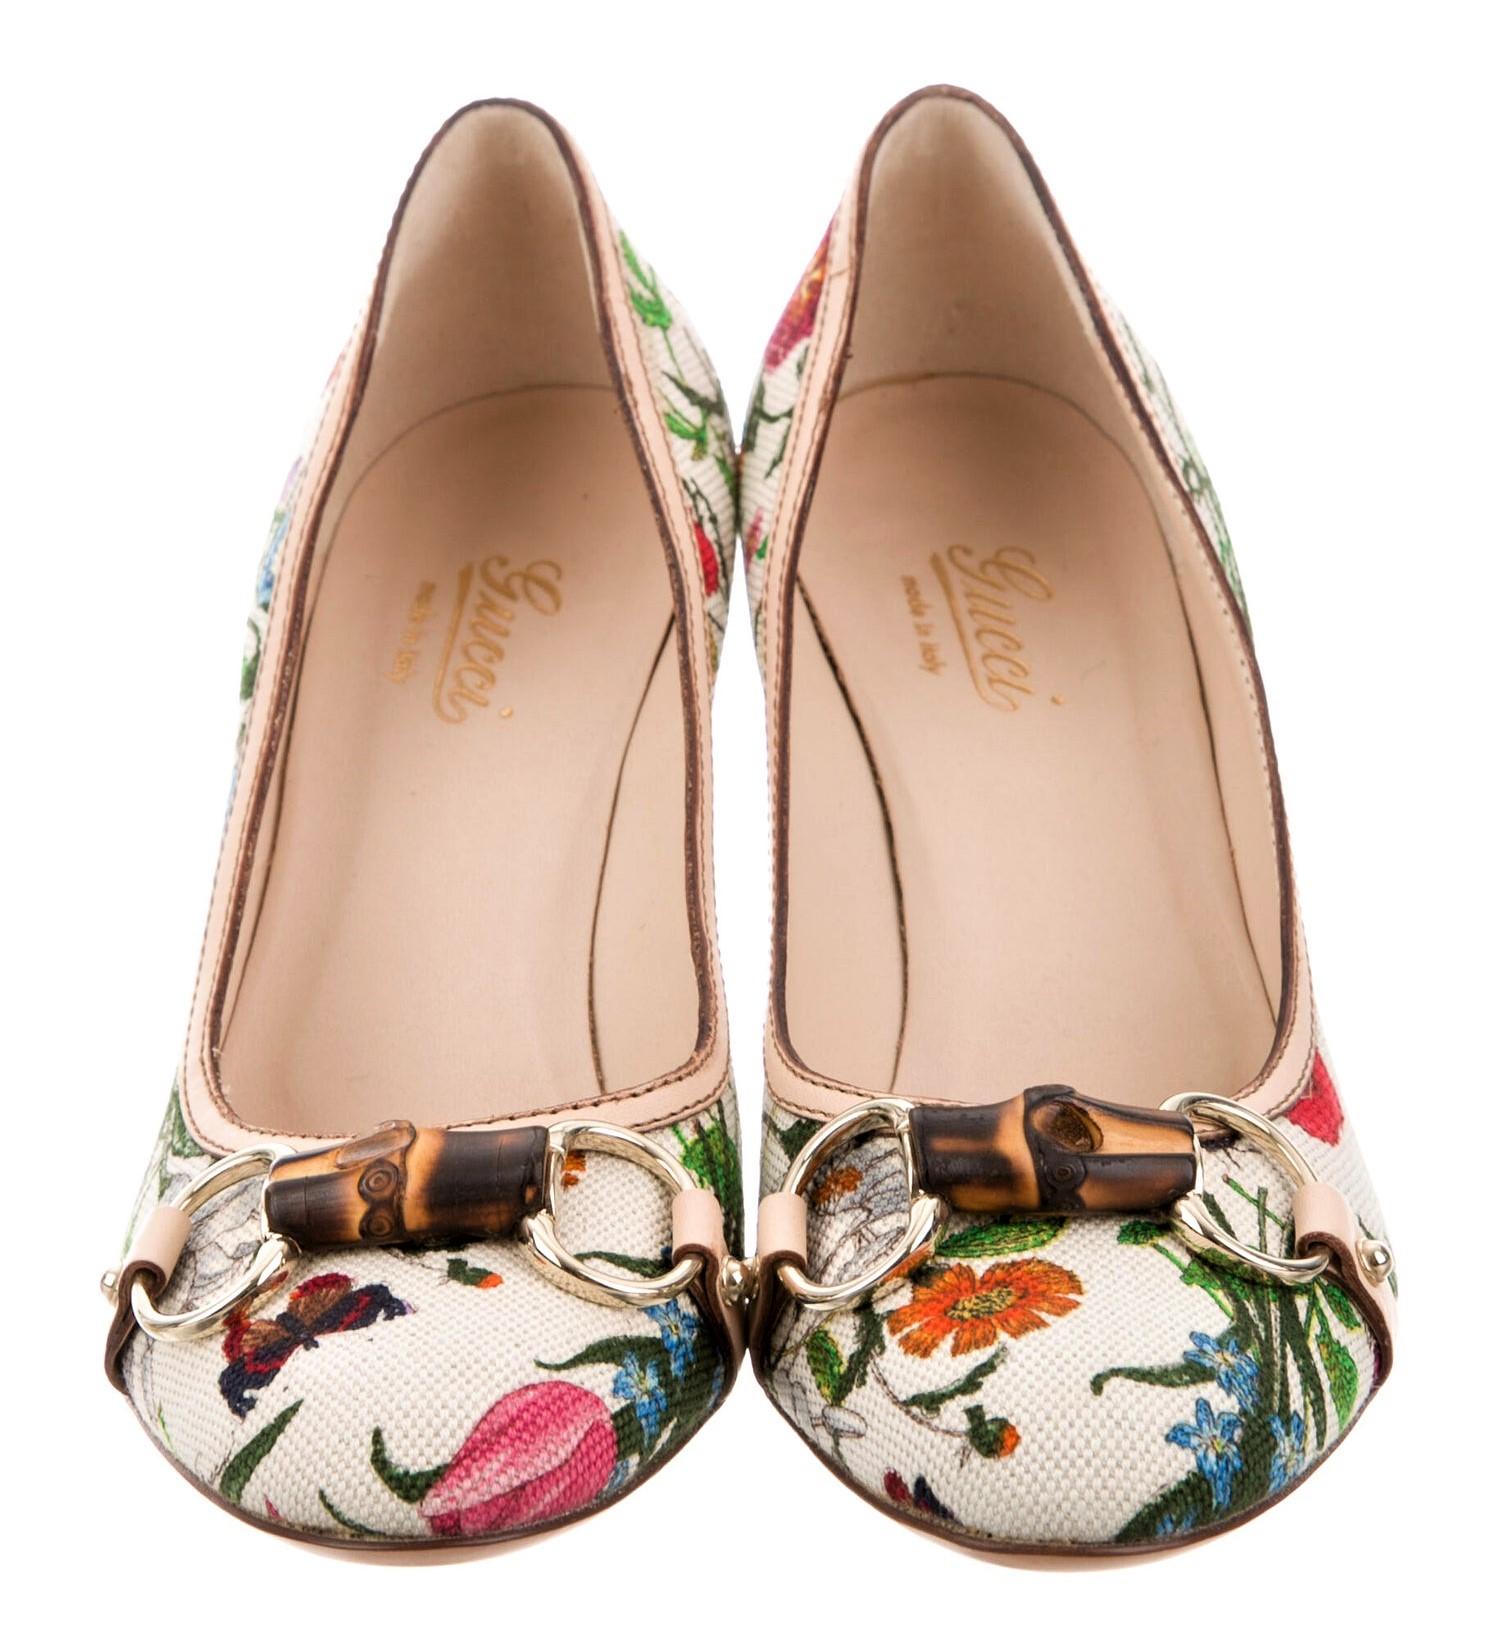 Brand New
Gucci Flora Heels
Size:  10
Beautiful Iconic Canvas Flora Pattern
Bamboo & Gold Hardware
Leather Footbed
Wood Heel
Heel Height 3